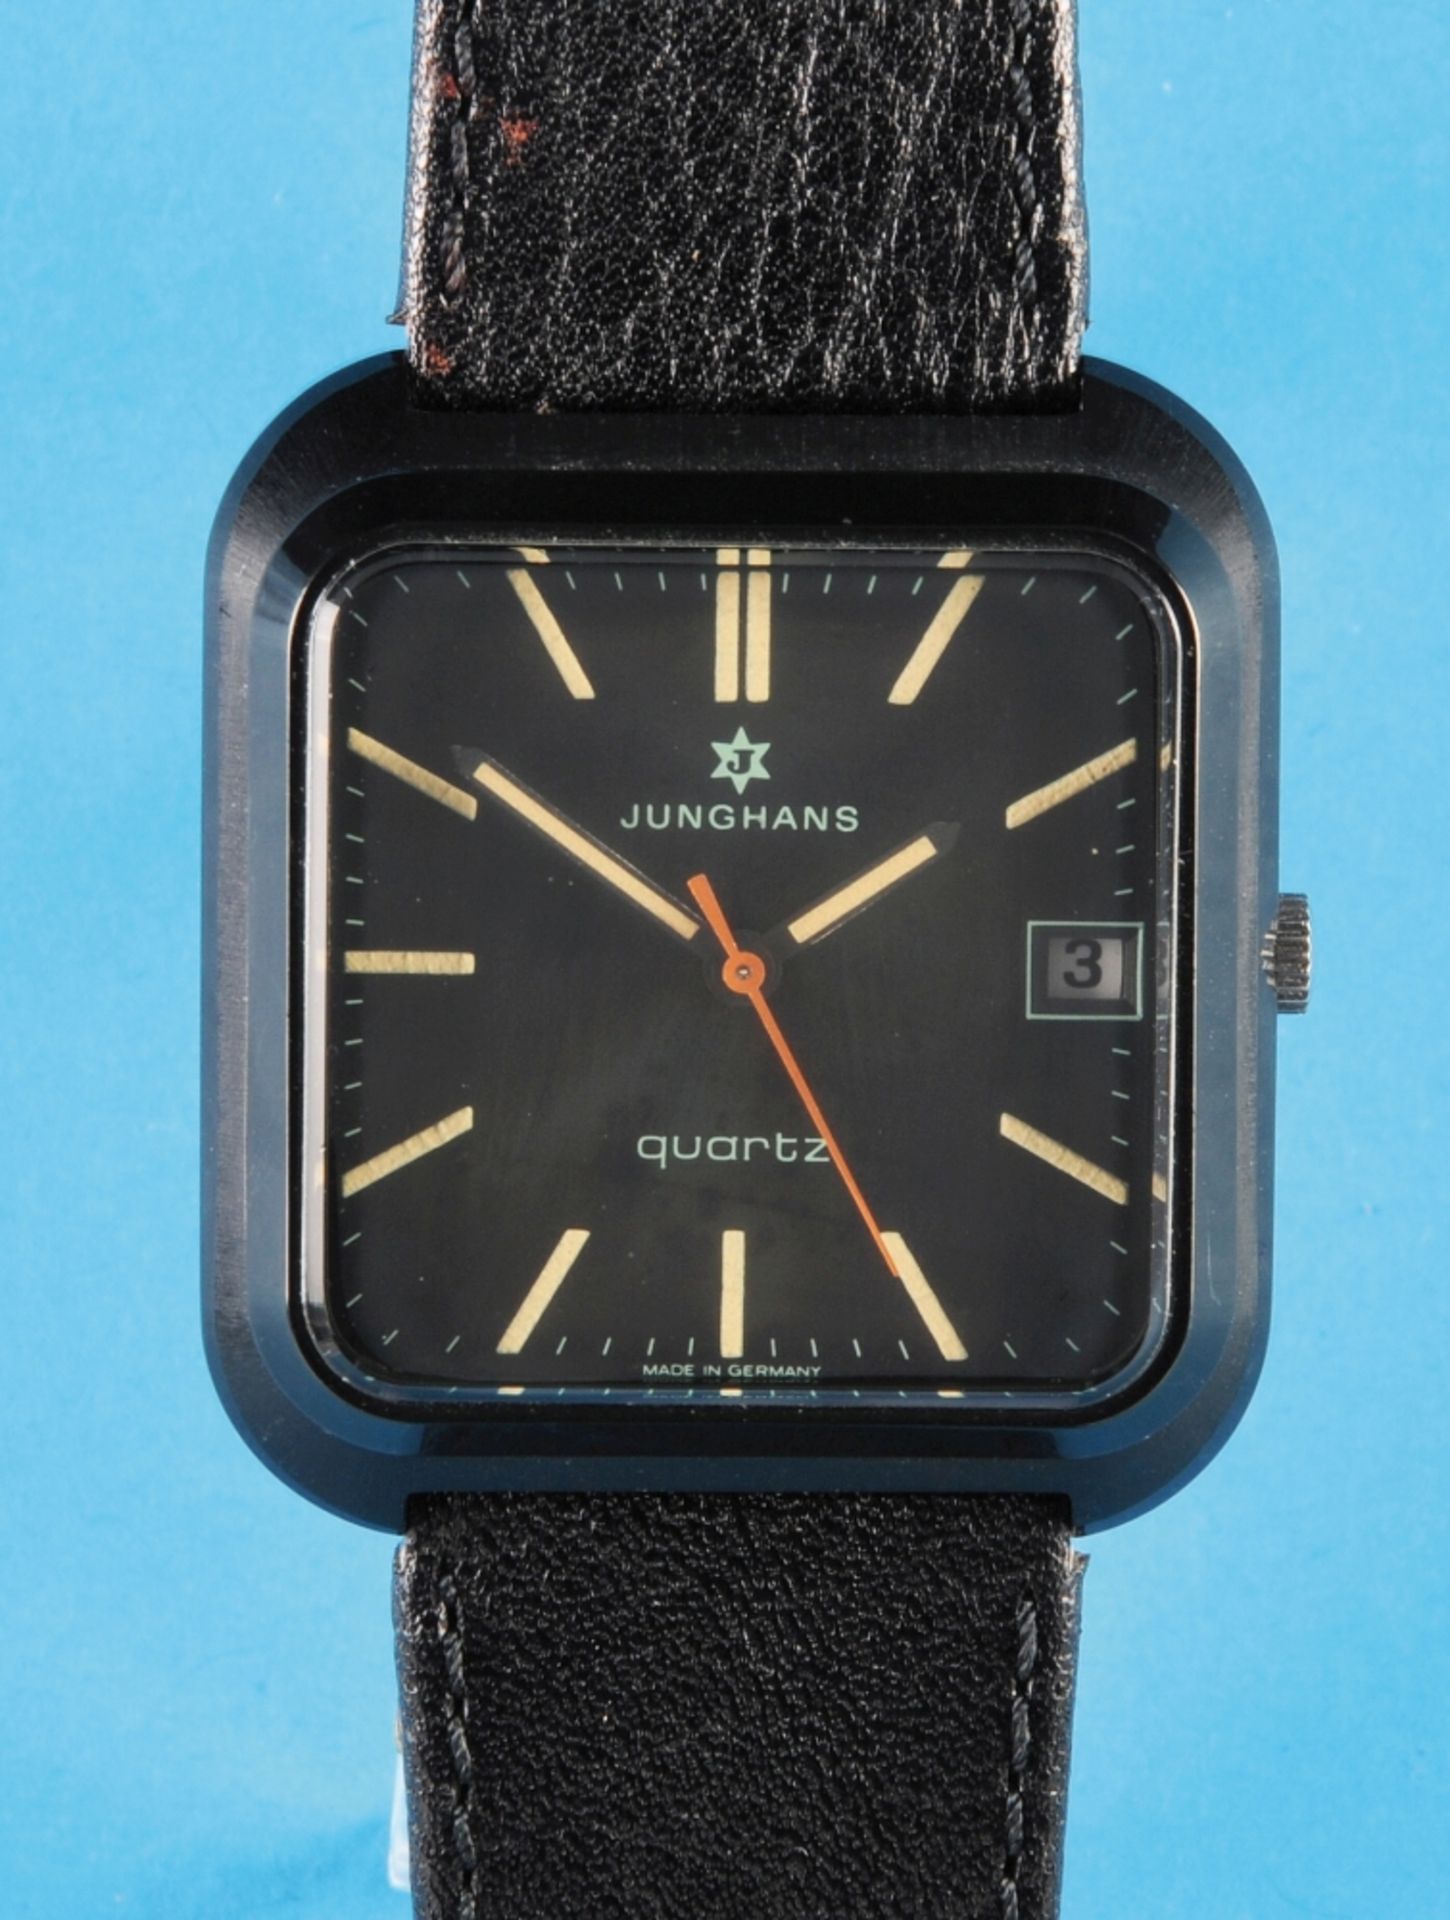 Junghans Quartz, square, black wristwatch with center second hand and date, steel pressure back,